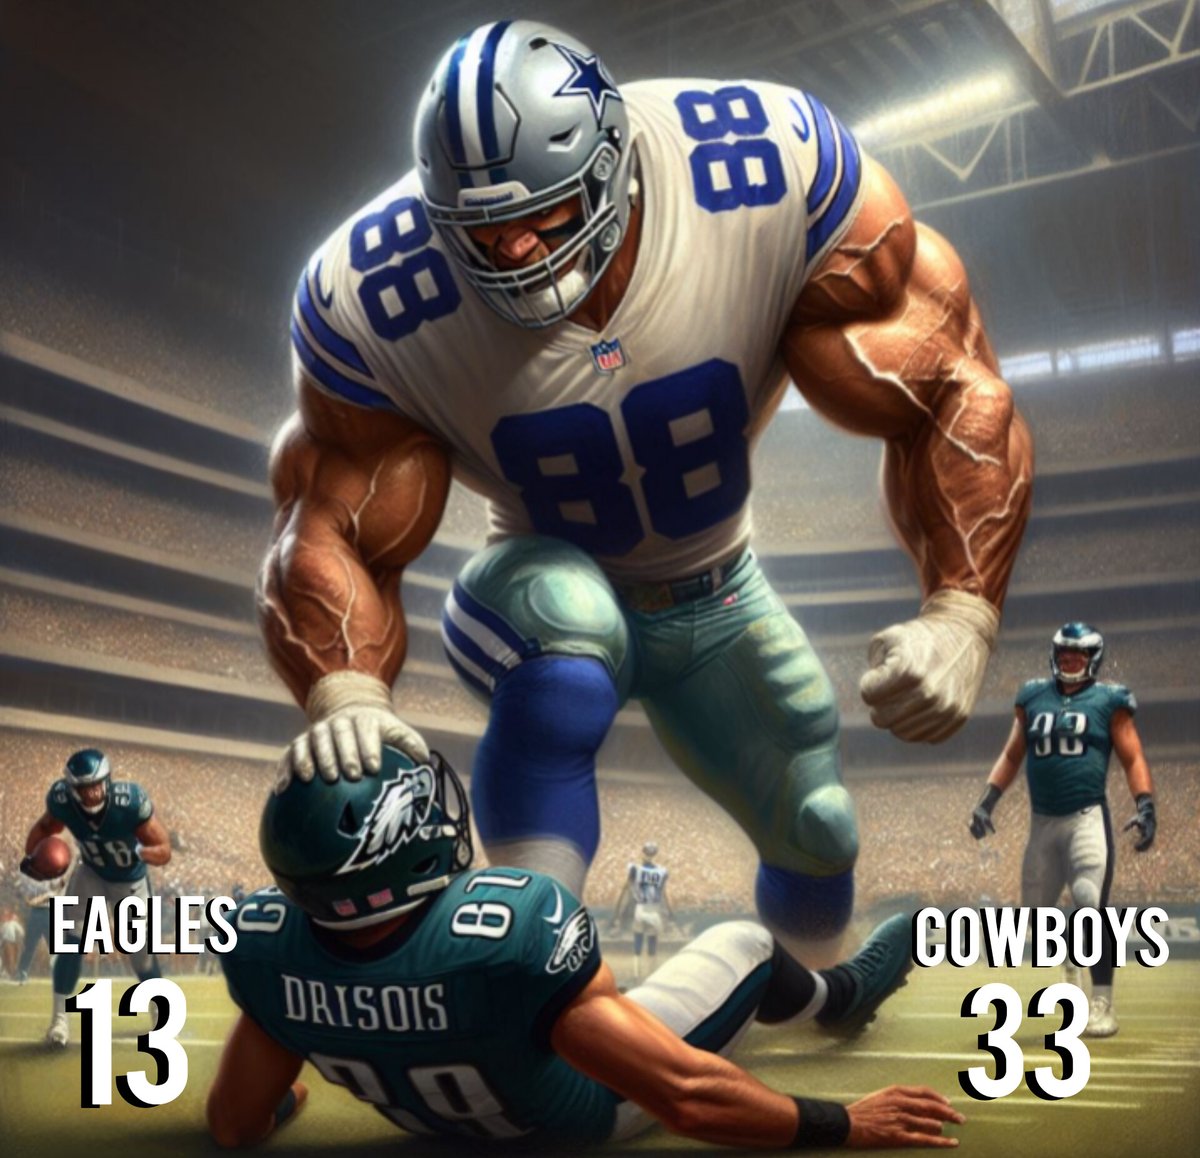 #Dallas dominates from start to finish to take control of the NFC East! 

#PHIvsDAL | #DALvsPHI | #DallasCowboys | #FlyEaglesFly | #CowboysNation | #Philadelphia | #NFL | #SNF